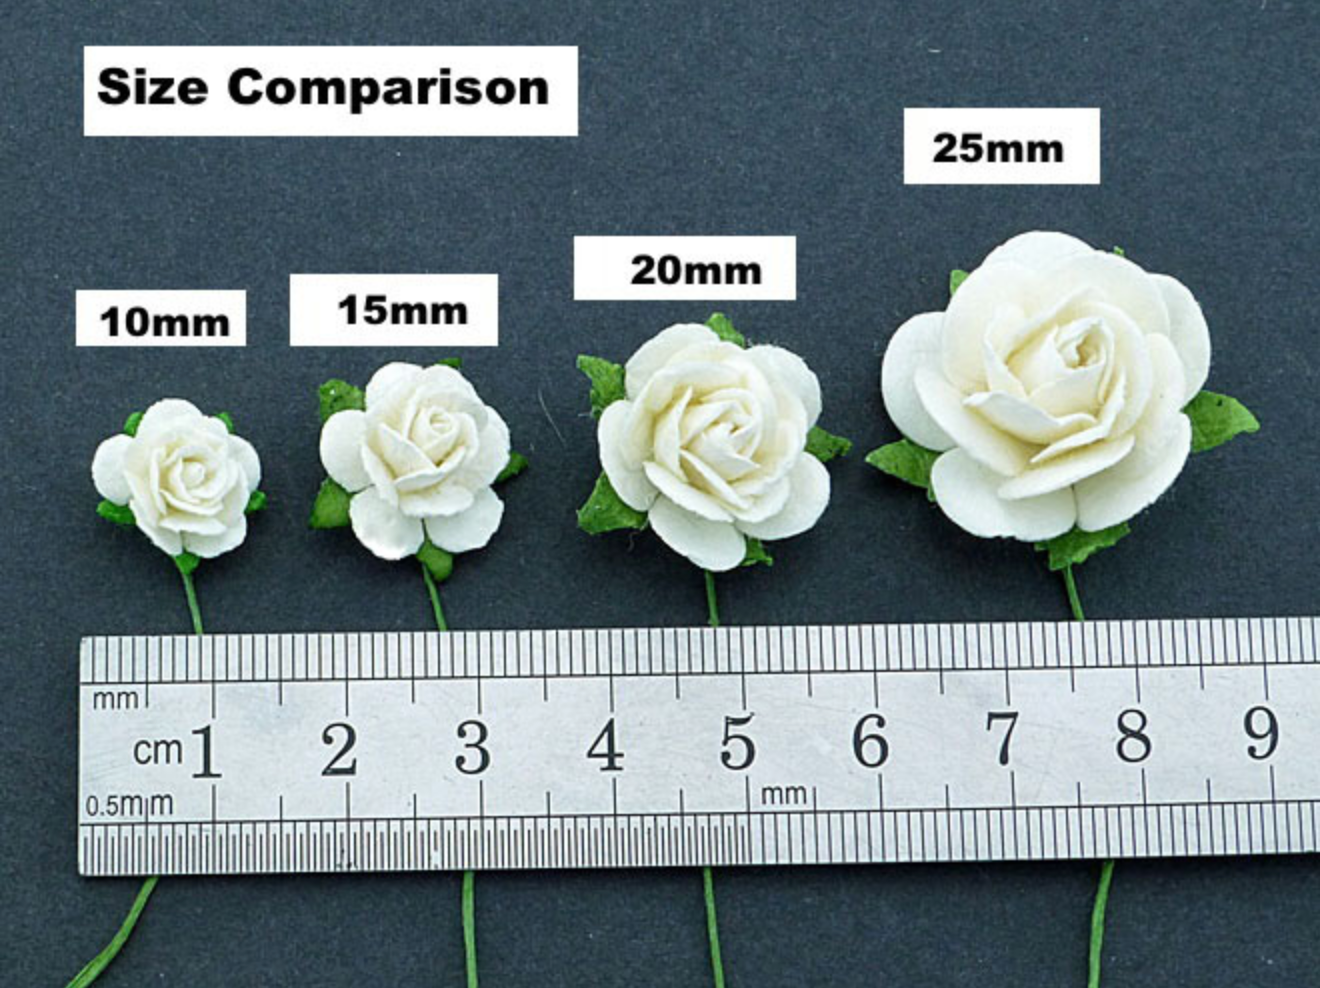 Pale Peach Mulberry Paper Roses - 10mm, 15mm, 20mm